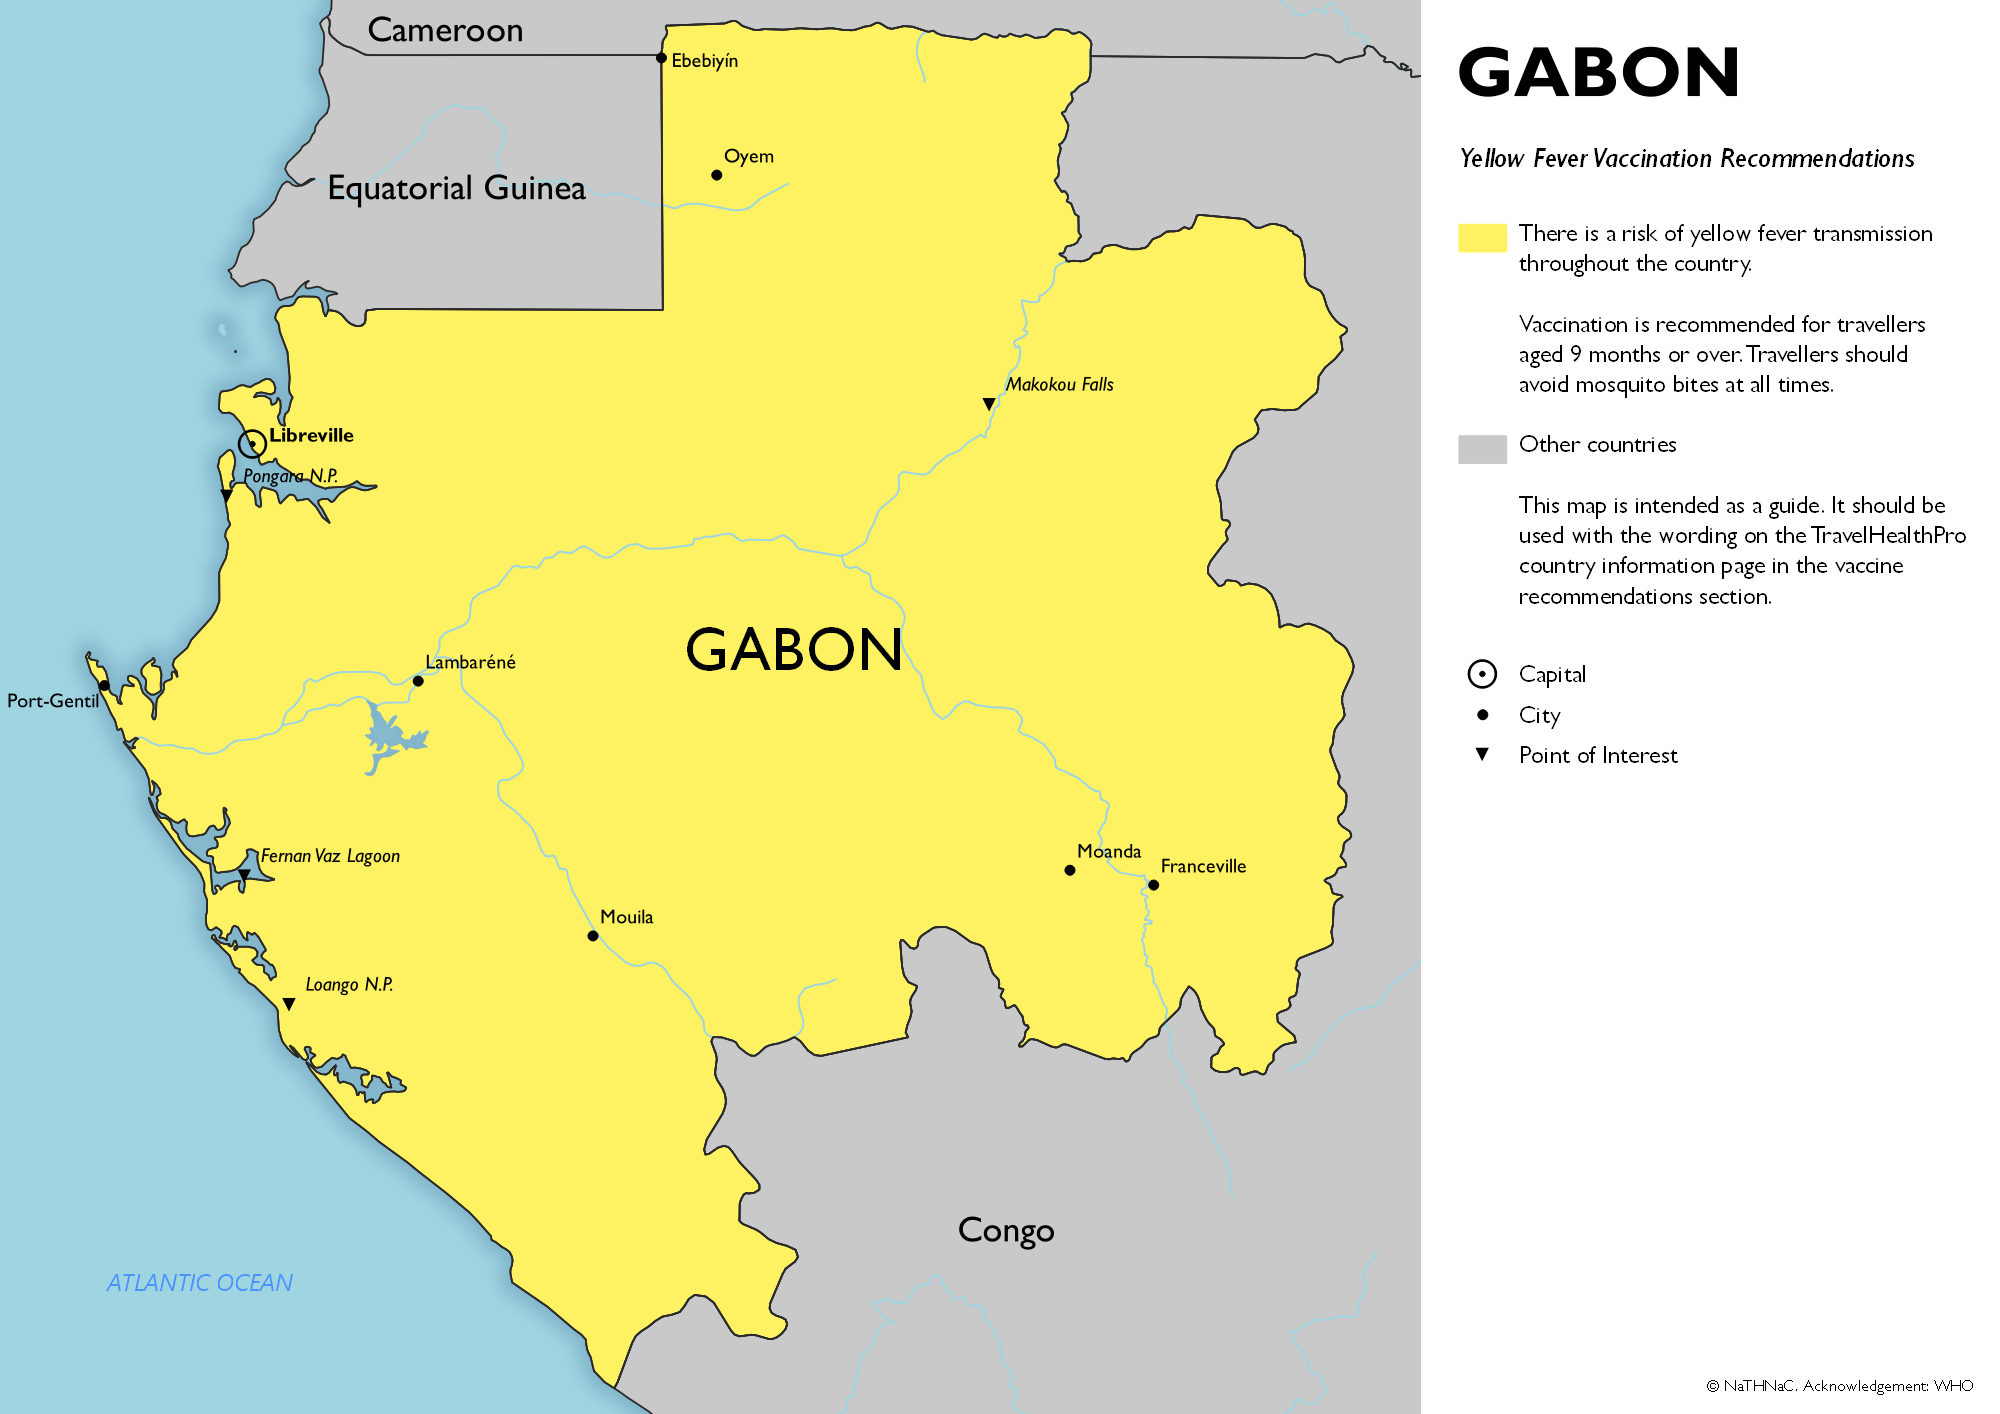 Yellow fever vaccine recommendation map for Gabon